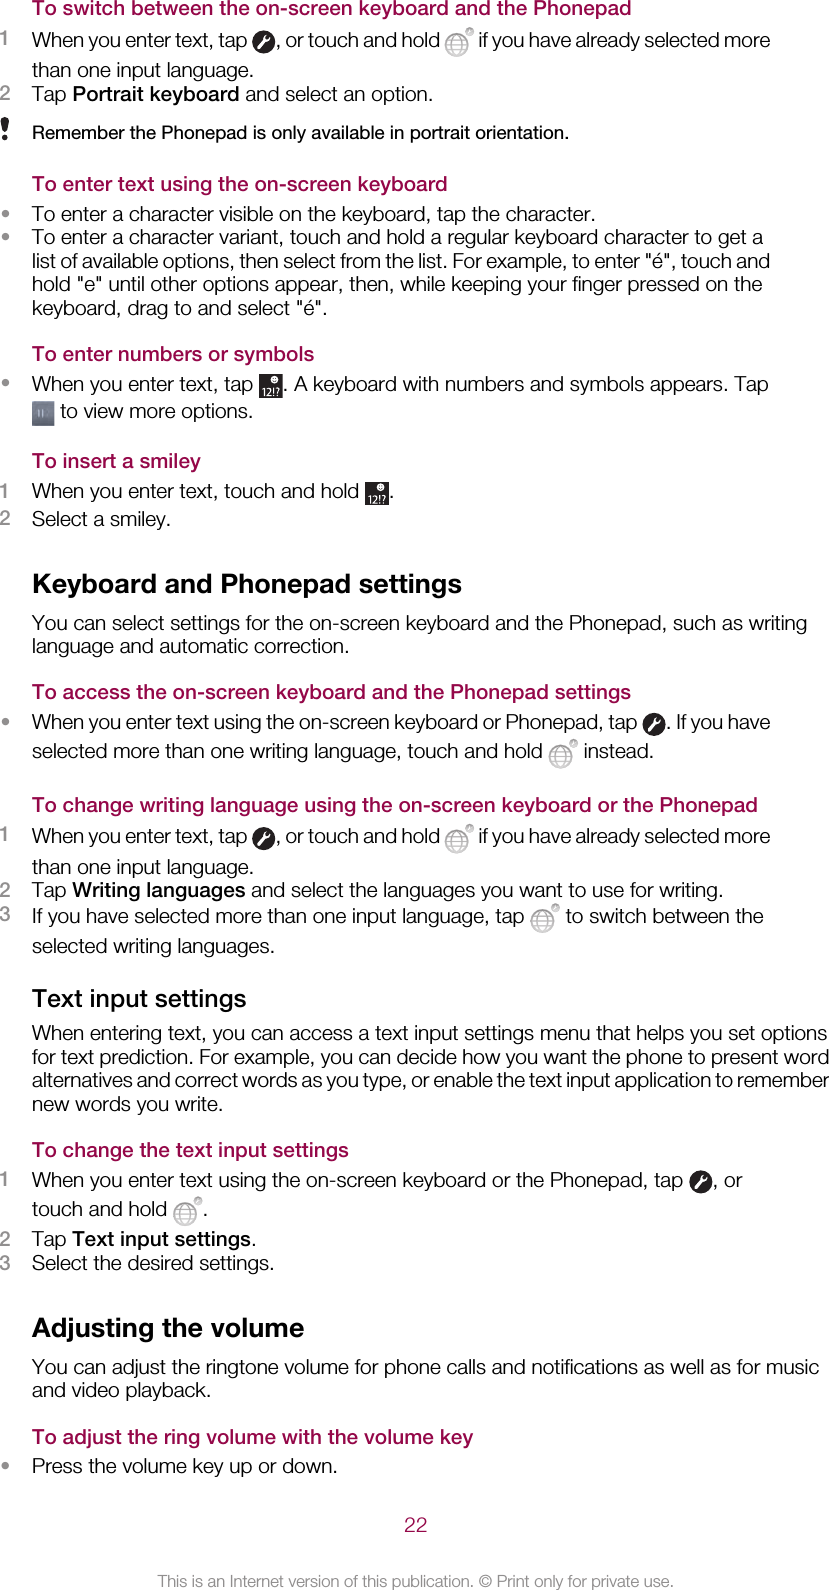 To switch between the on-screen keyboard and the Phonepad1When you enter text, tap  , or touch and hold   if you have already selected morethan one input language.2Tap Portrait keyboard and select an option.Remember the Phonepad is only available in portrait orientation.To enter text using the on-screen keyboard•To enter a character visible on the keyboard, tap the character.•To enter a character variant, touch and hold a regular keyboard character to get alist of available options, then select from the list. For example, to enter &quot;é&quot;, touch andhold &quot;e&quot; until other options appear, then, while keeping your finger pressed on thekeyboard, drag to and select &quot;é&quot;.To enter numbers or symbols•When you enter text, tap  . A keyboard with numbers and symbols appears. Tap to view more options.To insert a smiley1When you enter text, touch and hold  .2Select a smiley.Keyboard and Phonepad settingsYou can select settings for the on-screen keyboard and the Phonepad, such as writinglanguage and automatic correction.To access the on-screen keyboard and the Phonepad settings•When you enter text using the on-screen keyboard or Phonepad, tap  . If you haveselected more than one writing language, touch and hold   instead.To change writing language using the on-screen keyboard or the Phonepad1When you enter text, tap  , or touch and hold   if you have already selected morethan one input language.2Tap Writing languages and select the languages you want to use for writing.3If you have selected more than one input language, tap   to switch between theselected writing languages.Text input settingsWhen entering text, you can access a text input settings menu that helps you set optionsfor text prediction. For example, you can decide how you want the phone to present wordalternatives and correct words as you type, or enable the text input application to remembernew words you write.To change the text input settings1When you enter text using the on-screen keyboard or the Phonepad, tap  , ortouch and hold  .2Tap Text input settings.3Select the desired settings.Adjusting the volumeYou can adjust the ringtone volume for phone calls and notifications as well as for musicand video playback.To adjust the ring volume with the volume key•Press the volume key up or down.22This is an Internet version of this publication. © Print only for private use.